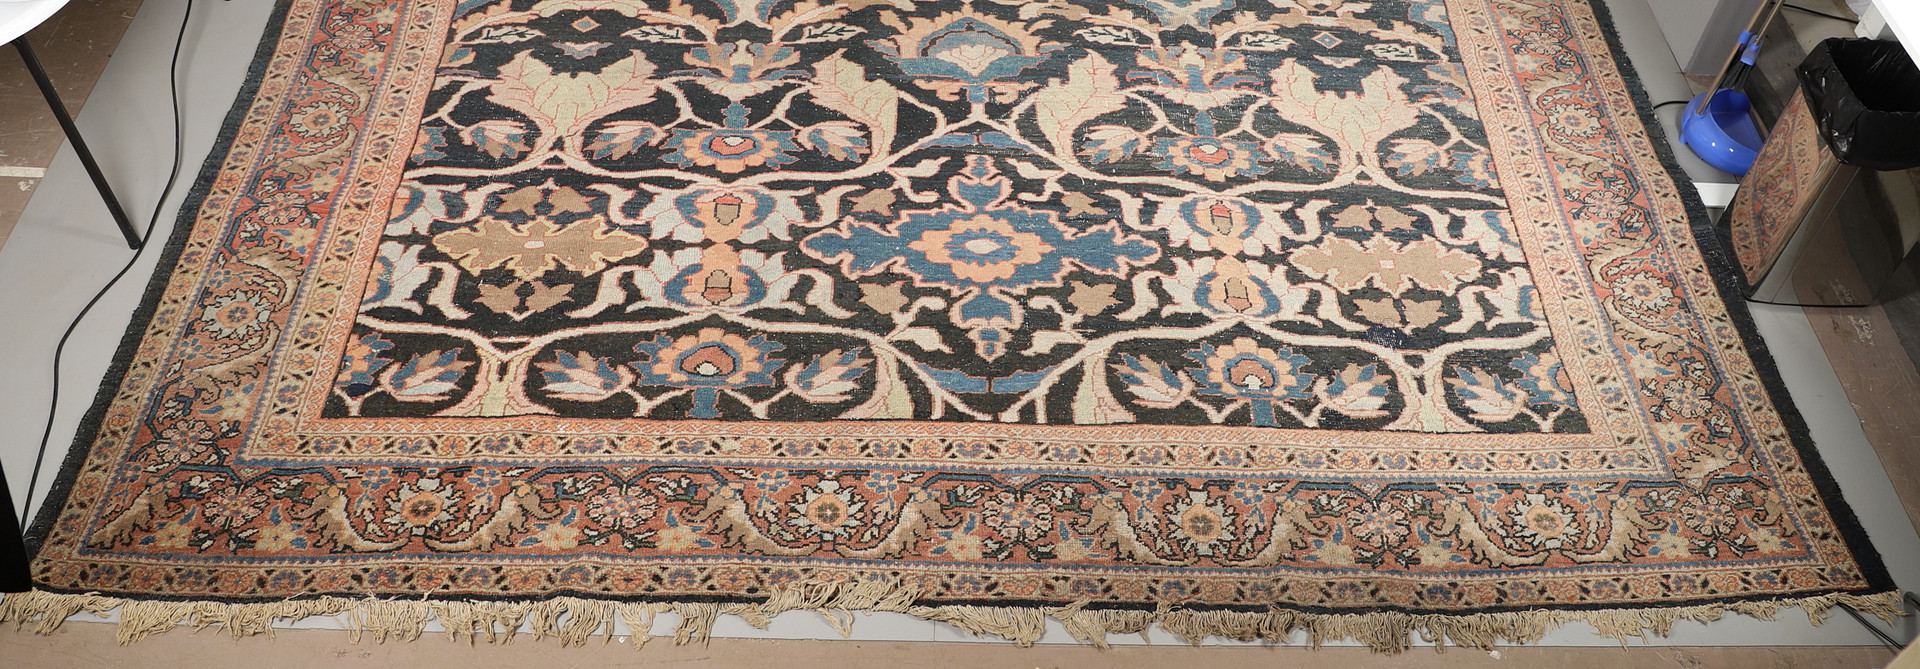 A SULTANABAD CARPET, WEST IRAN, CIRCA 1930. - Image 5 of 9